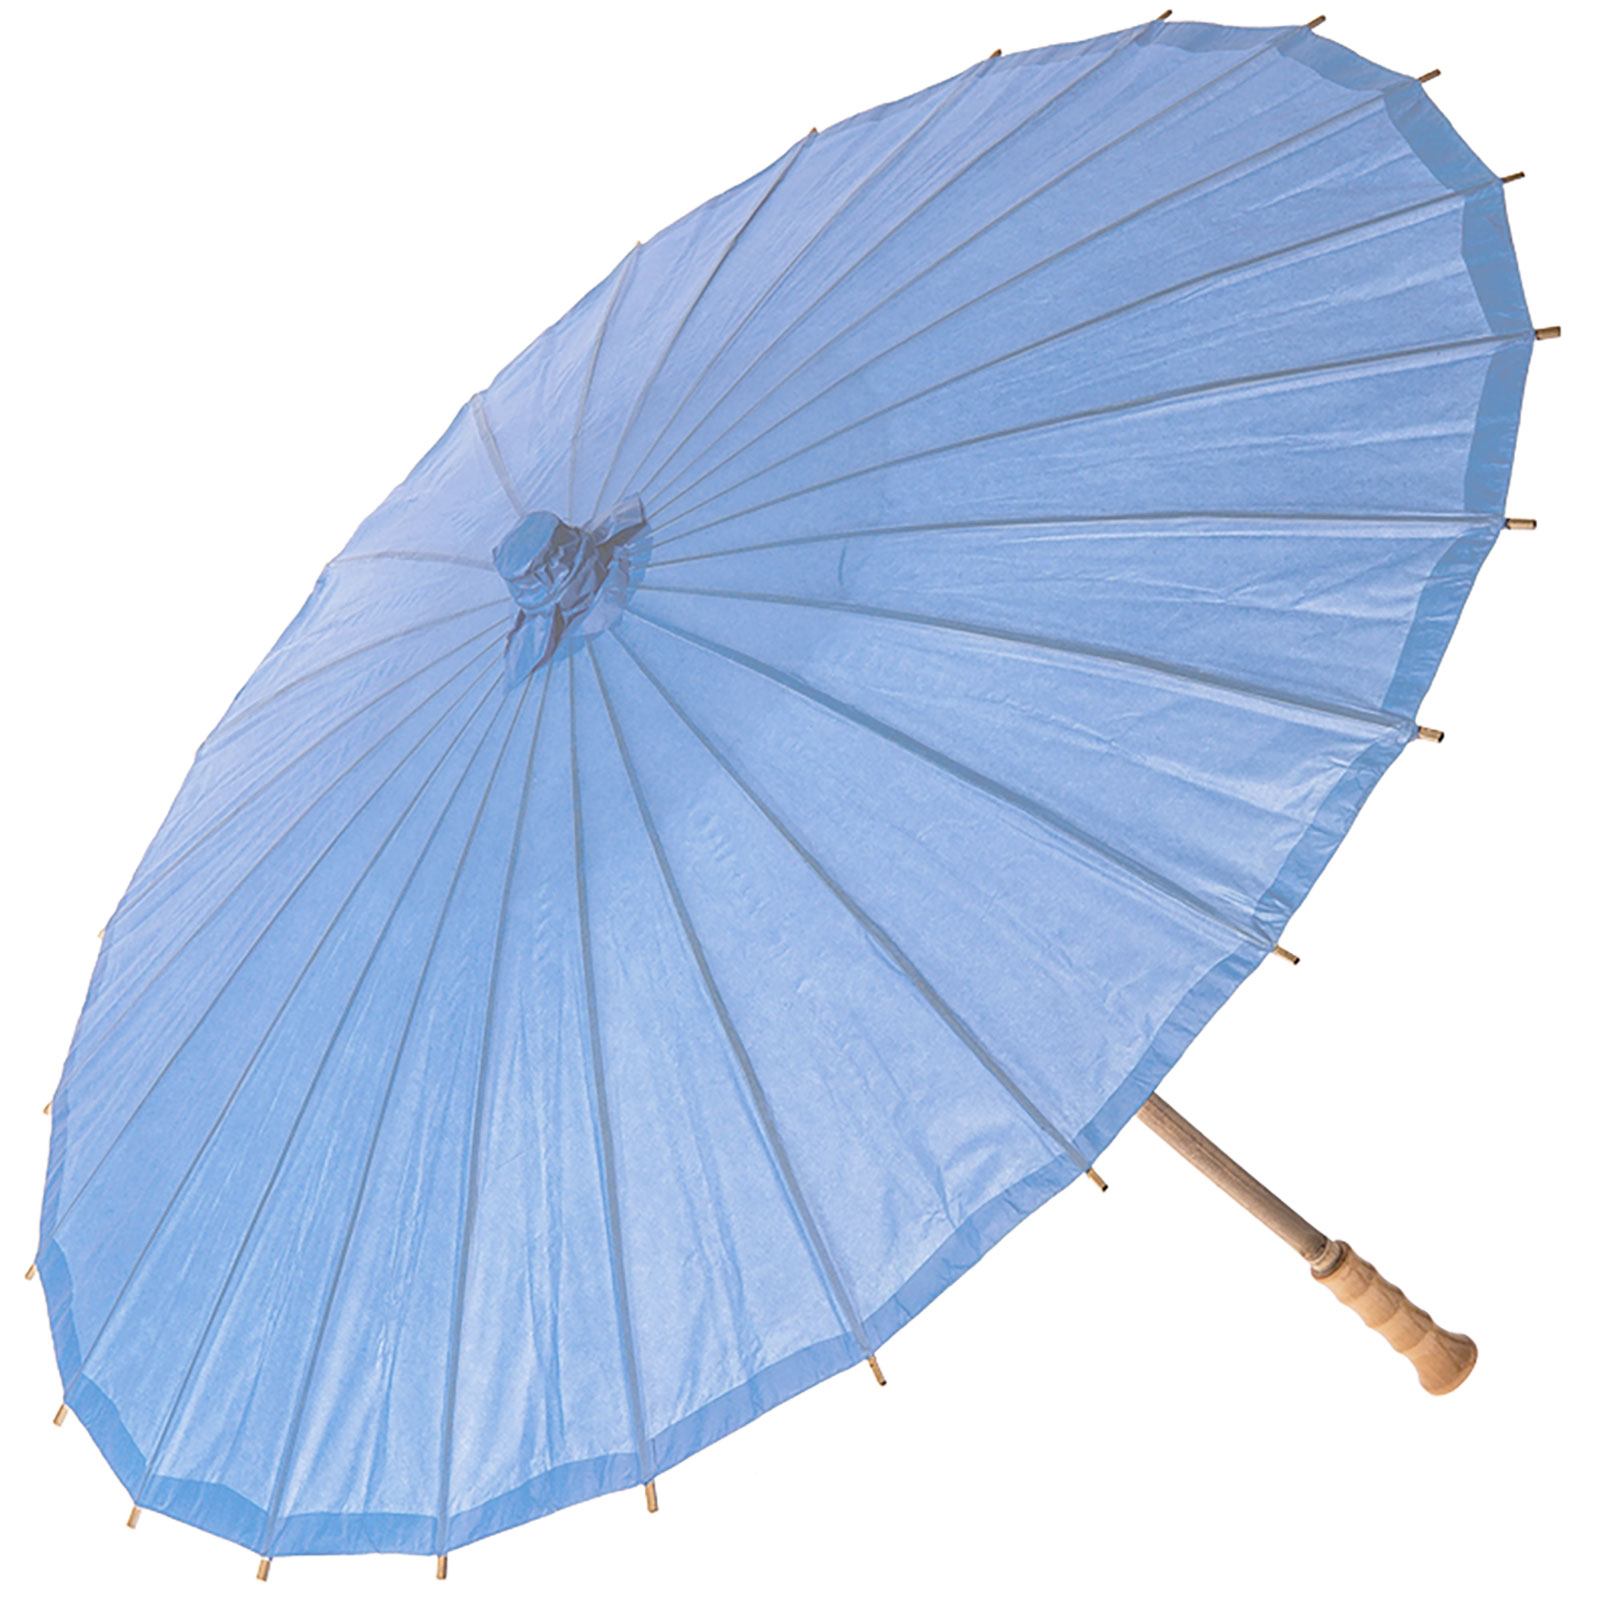 Chinese Paper and Bamboo Parasol with Elegant Handle - Serenity Blue